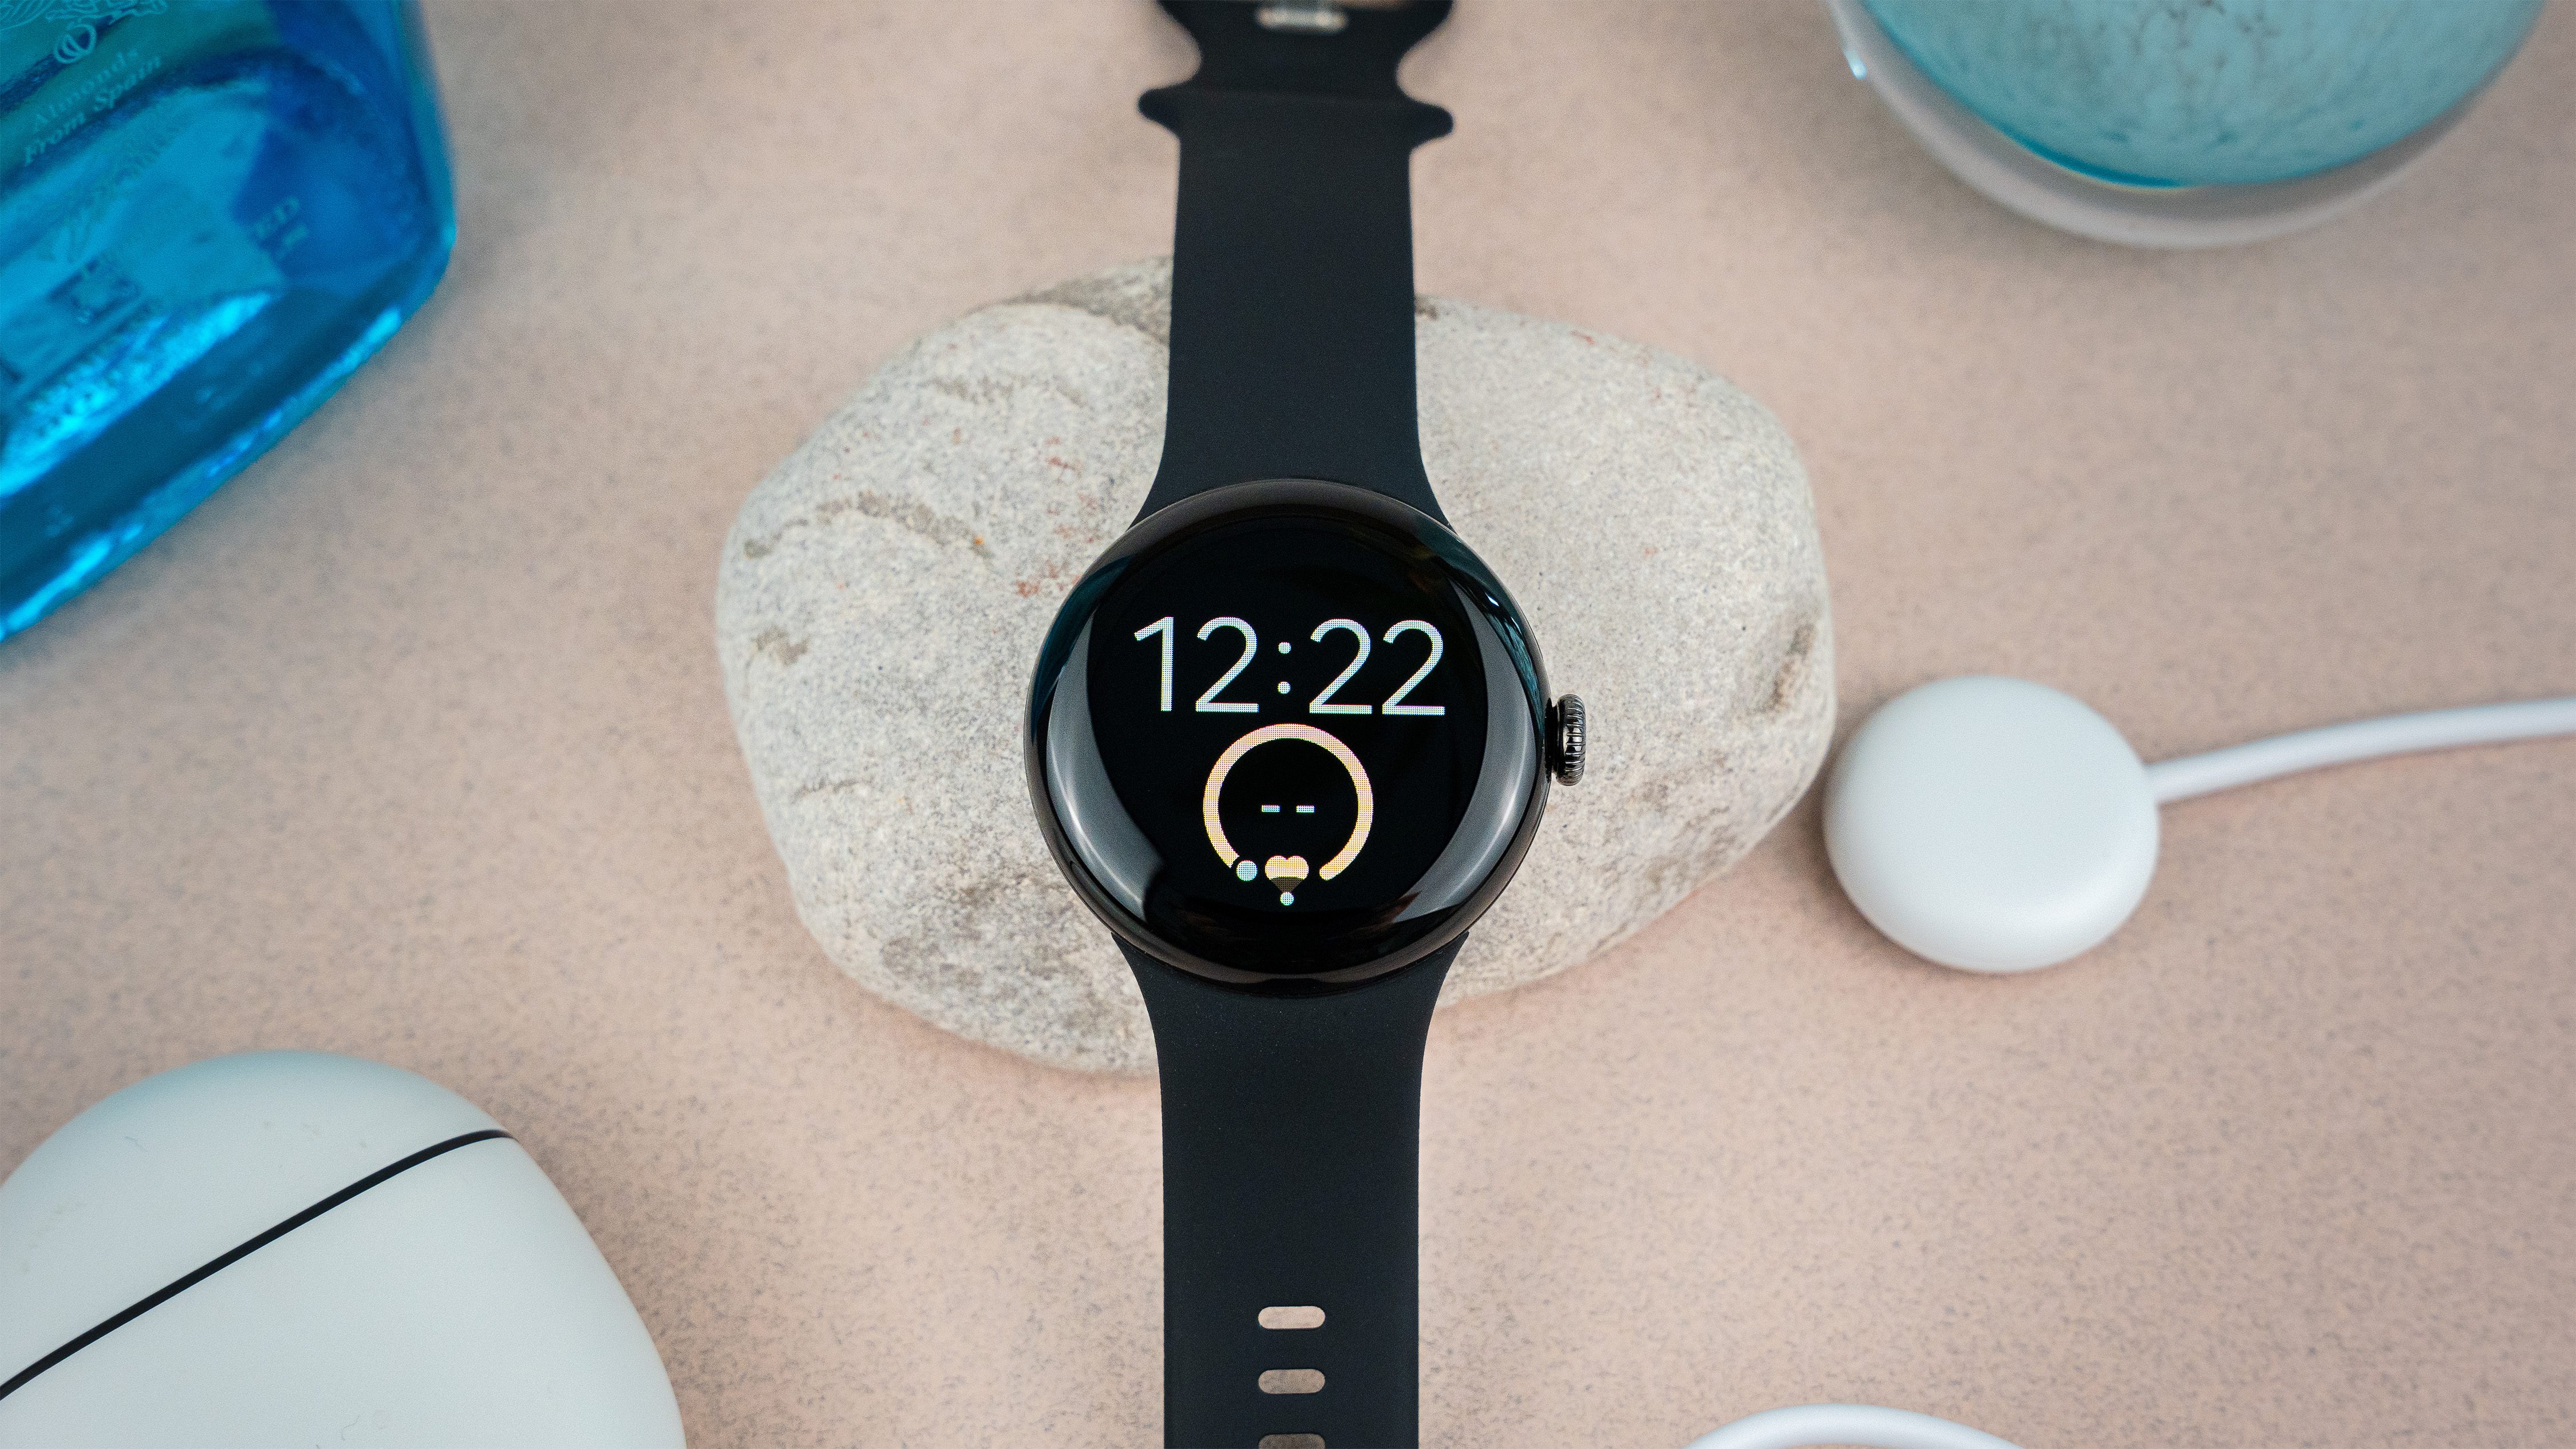 Google's Pixel Watch 2 Plunges to the New Best Price at $70 Off